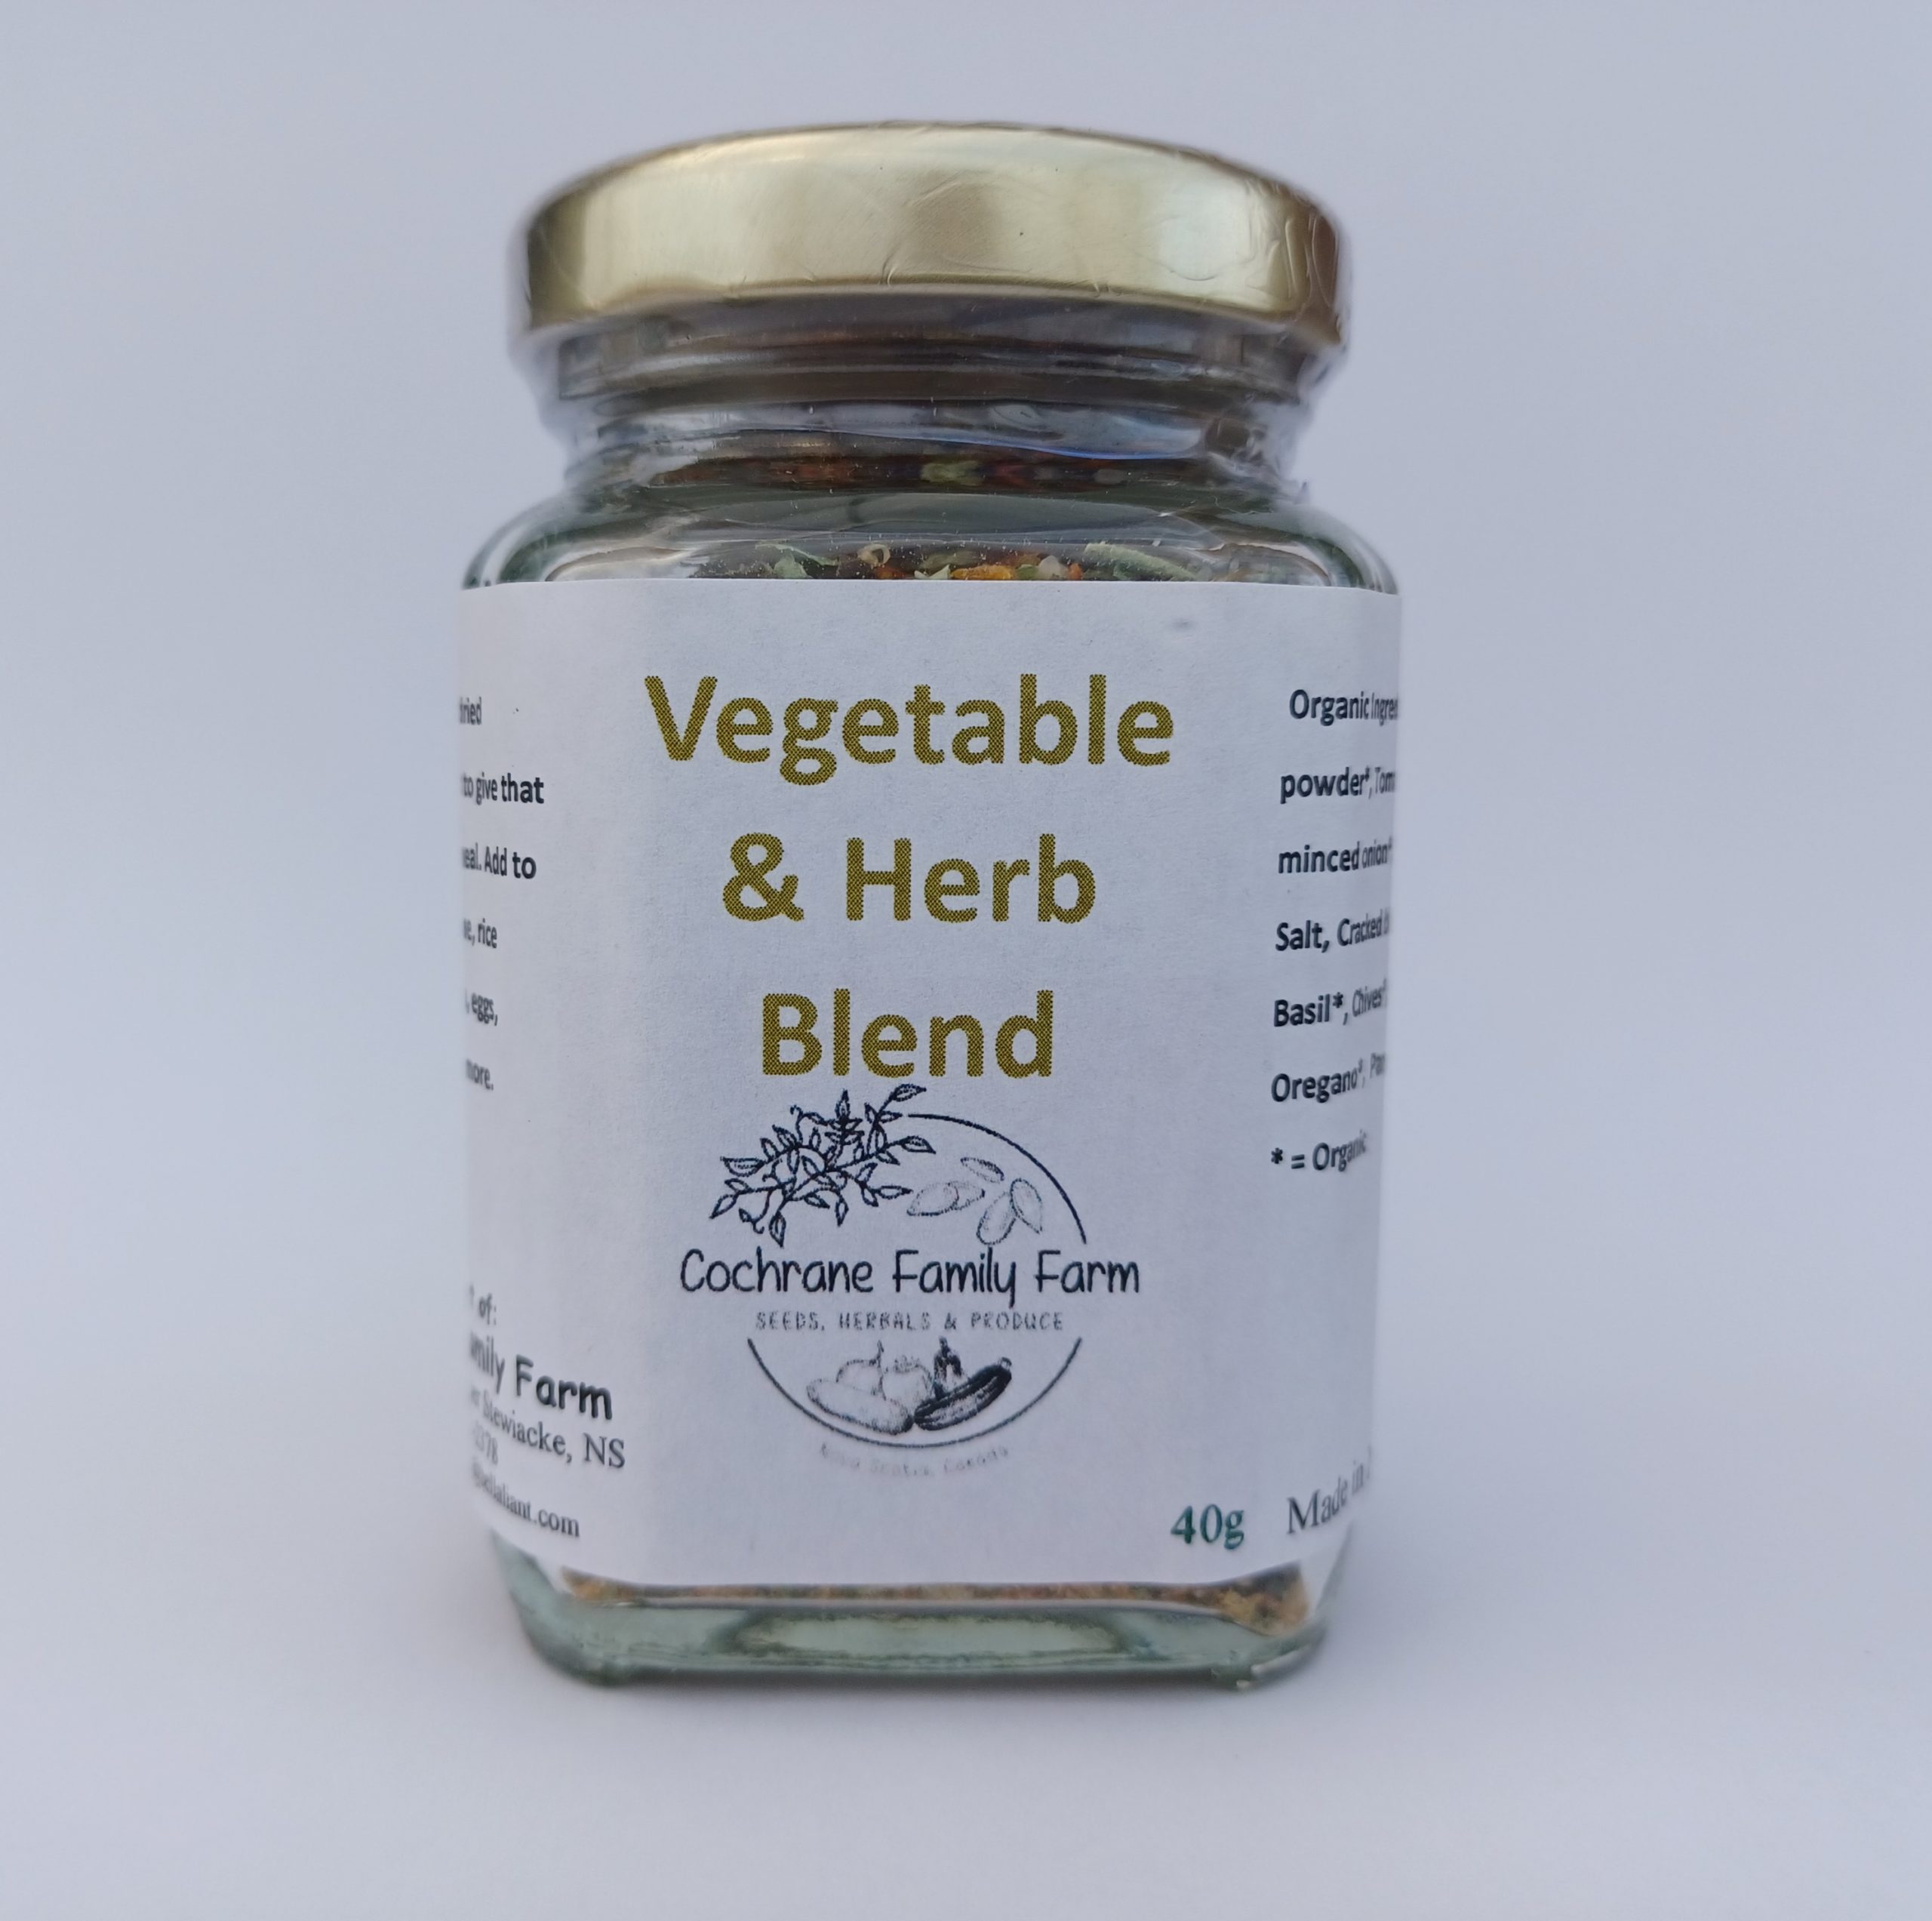 Vegetable & Herb Blend - a culinary delight